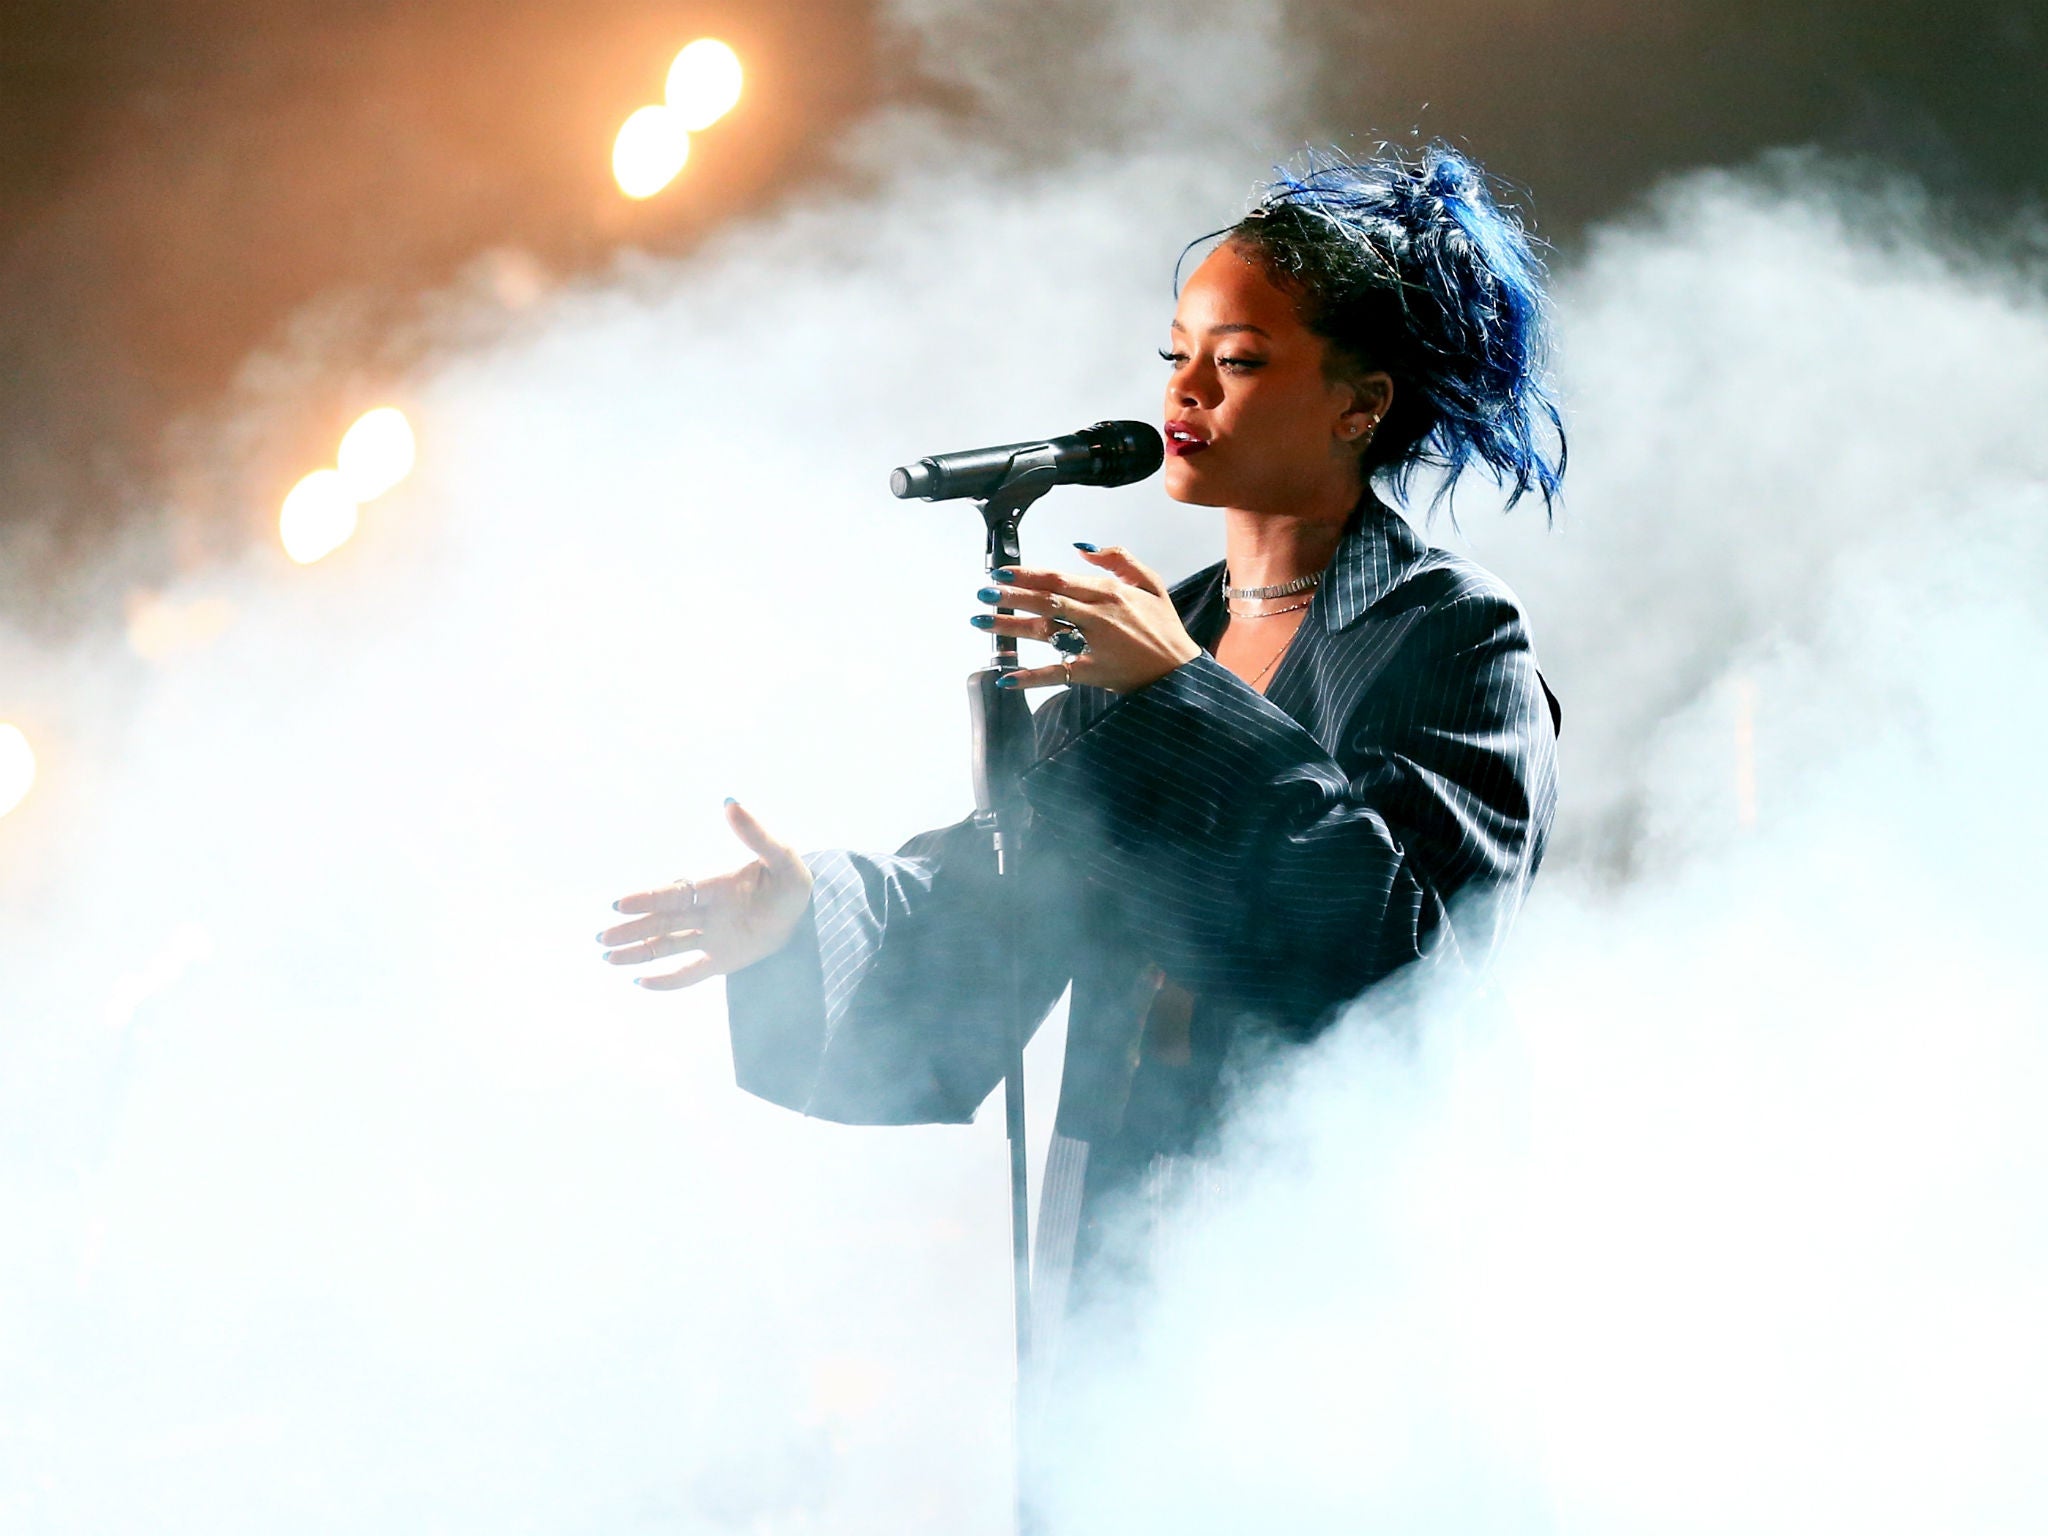 Trust Rihanna to make it rain just in time for a mass sing-a-long of 'Umbrella'